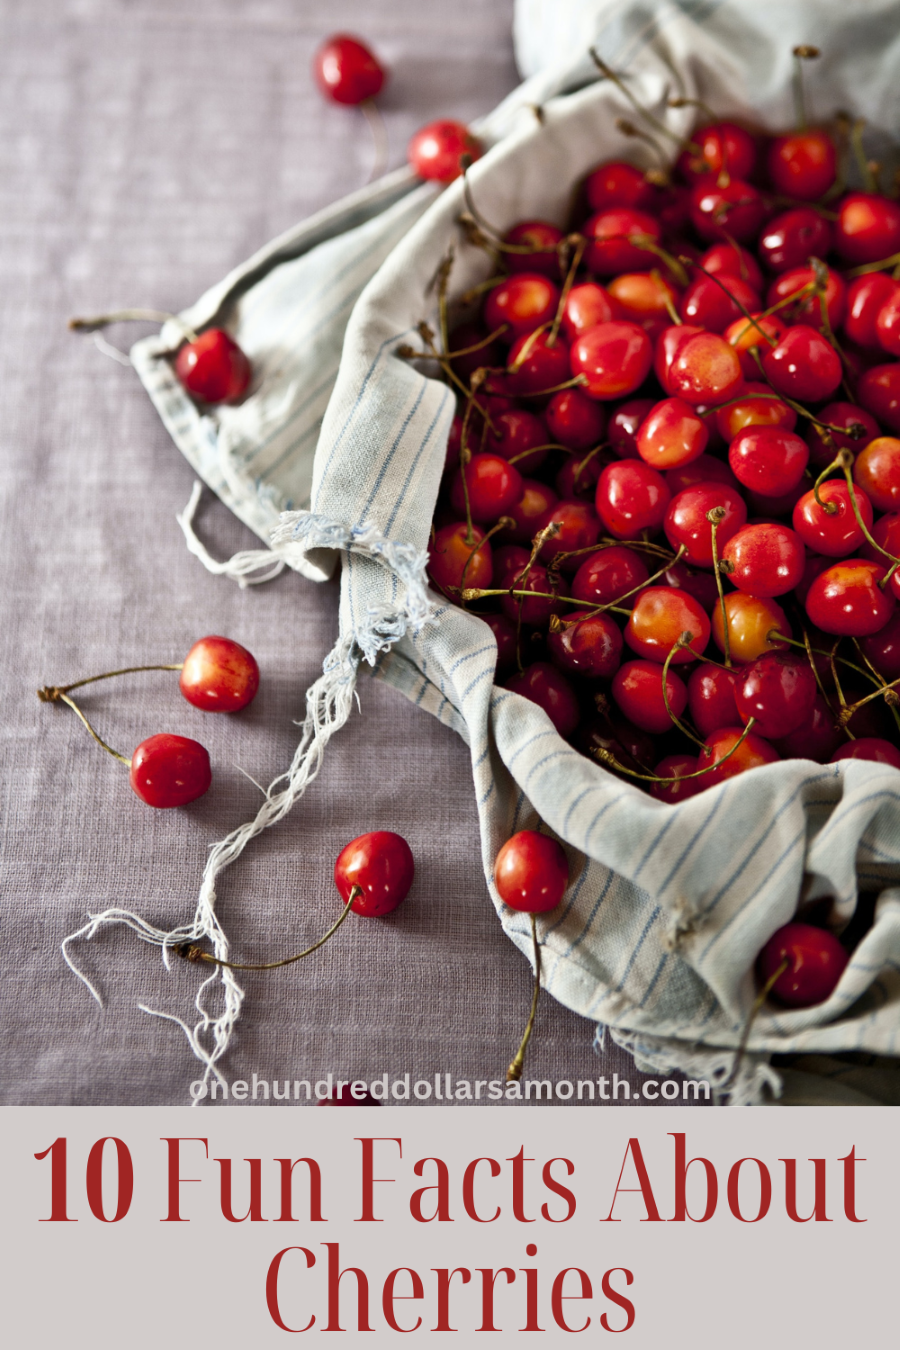 10 Fun Facts About Cherries